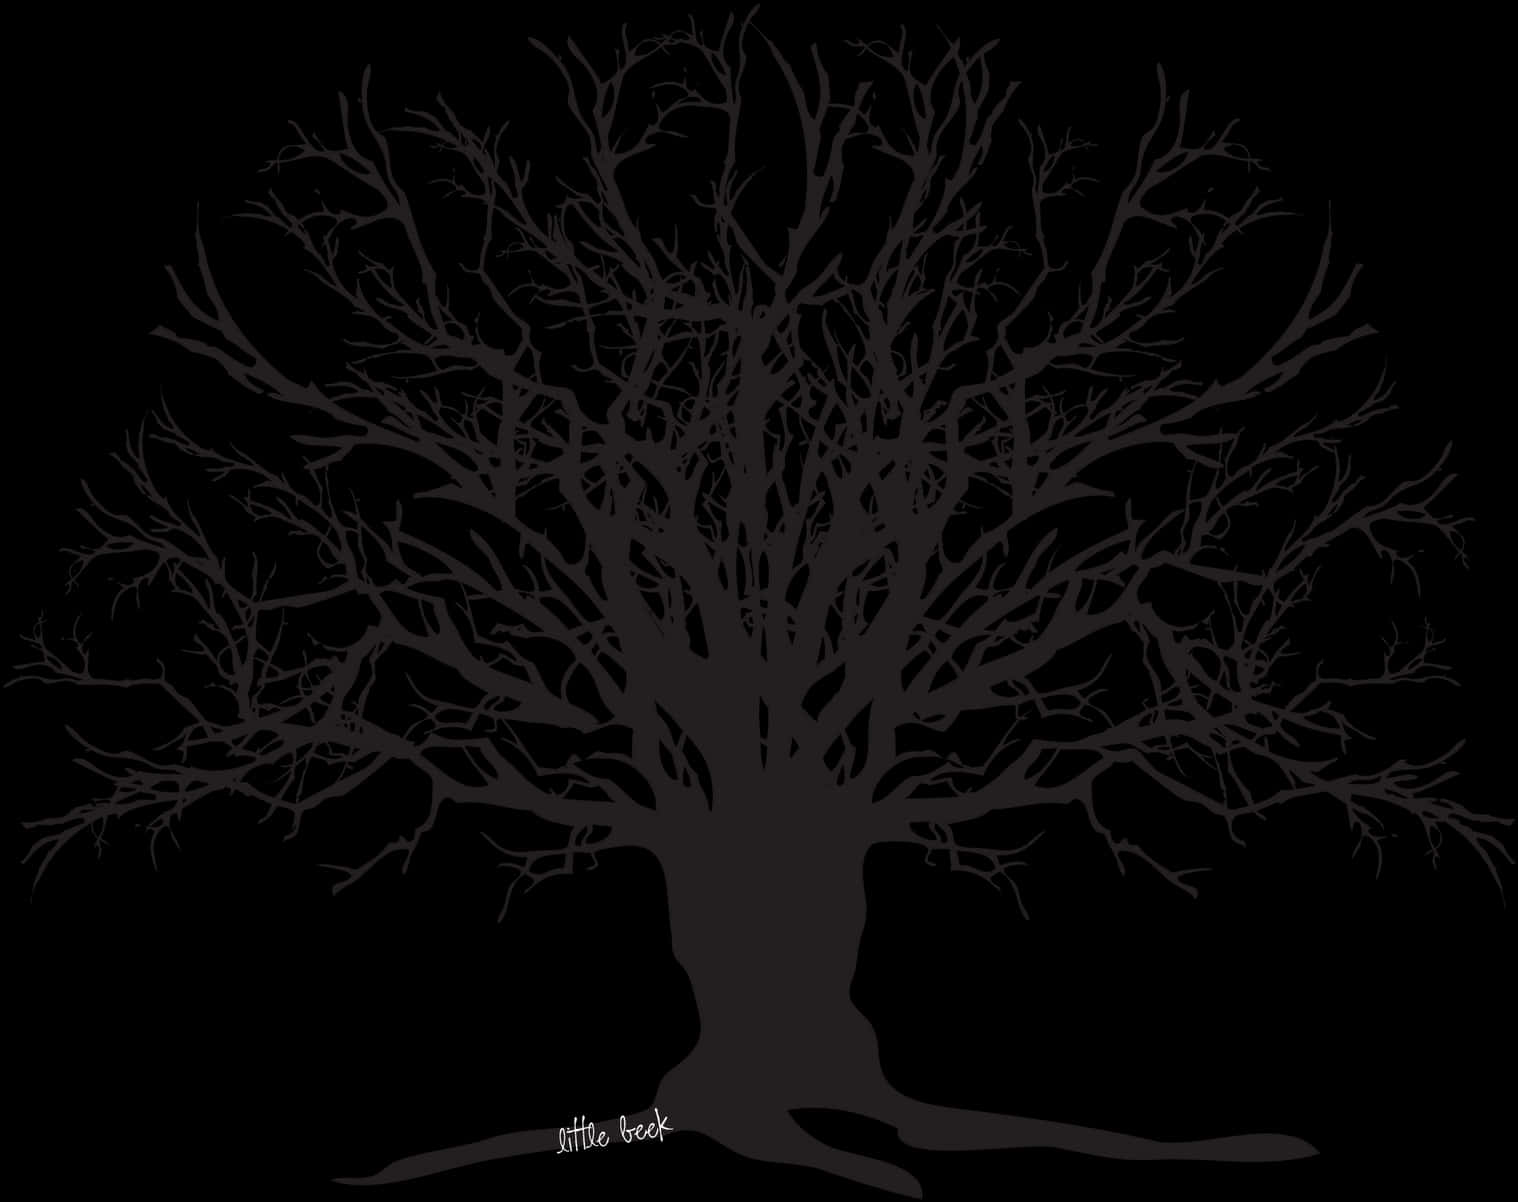 A Black Tree With No Leaves